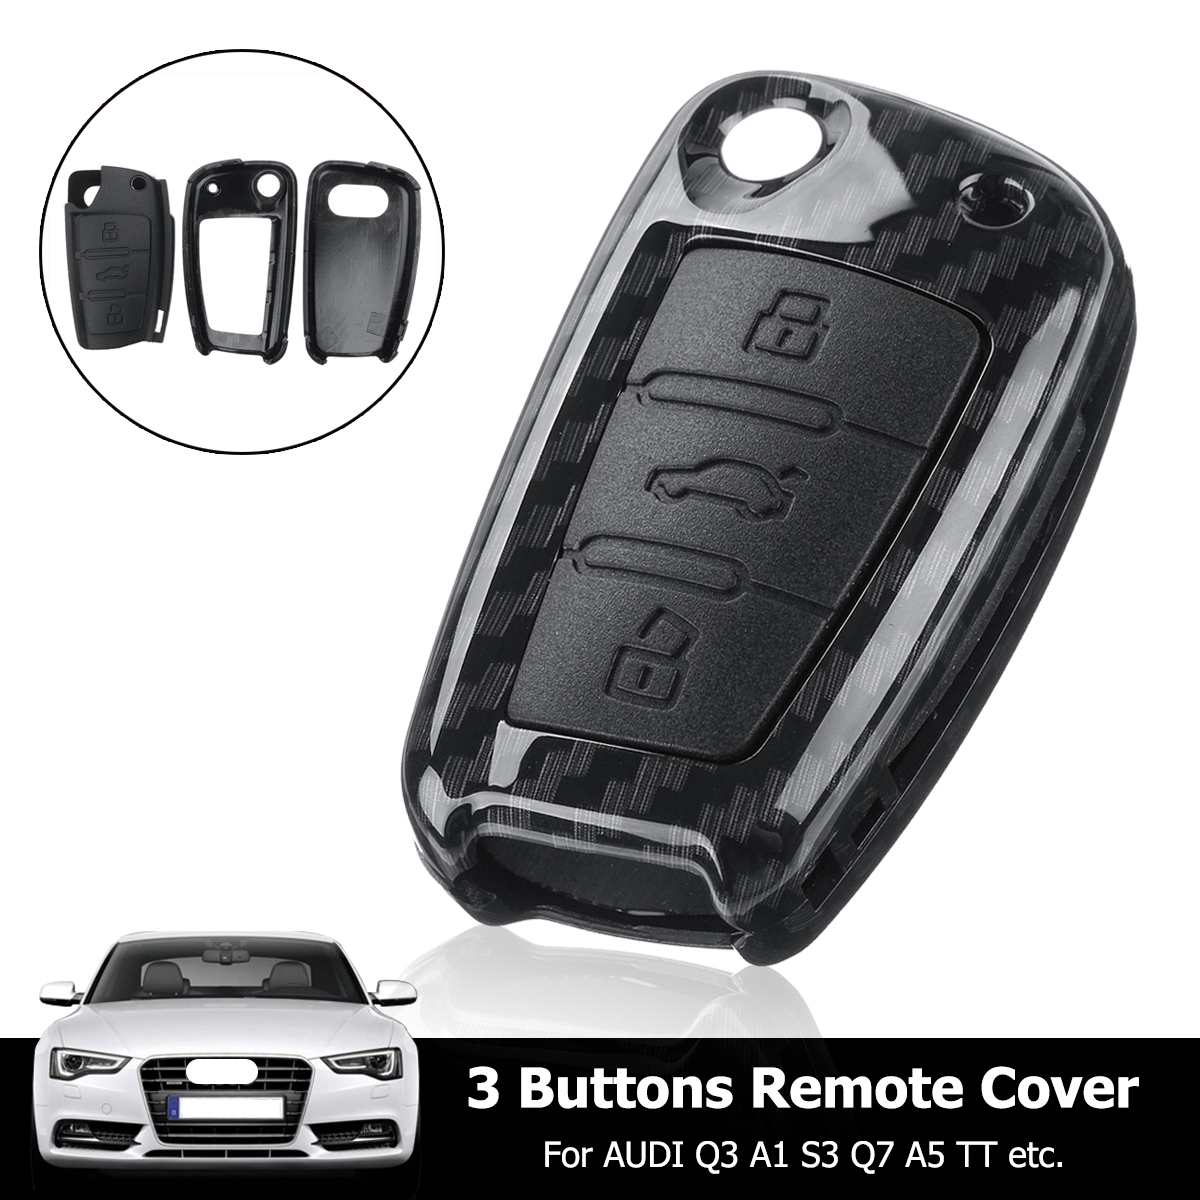 For Audi A1 A3 A4 A6 S3 S4 TT Q3 3 Button Remote Car Key Fob Case Rubber Pad